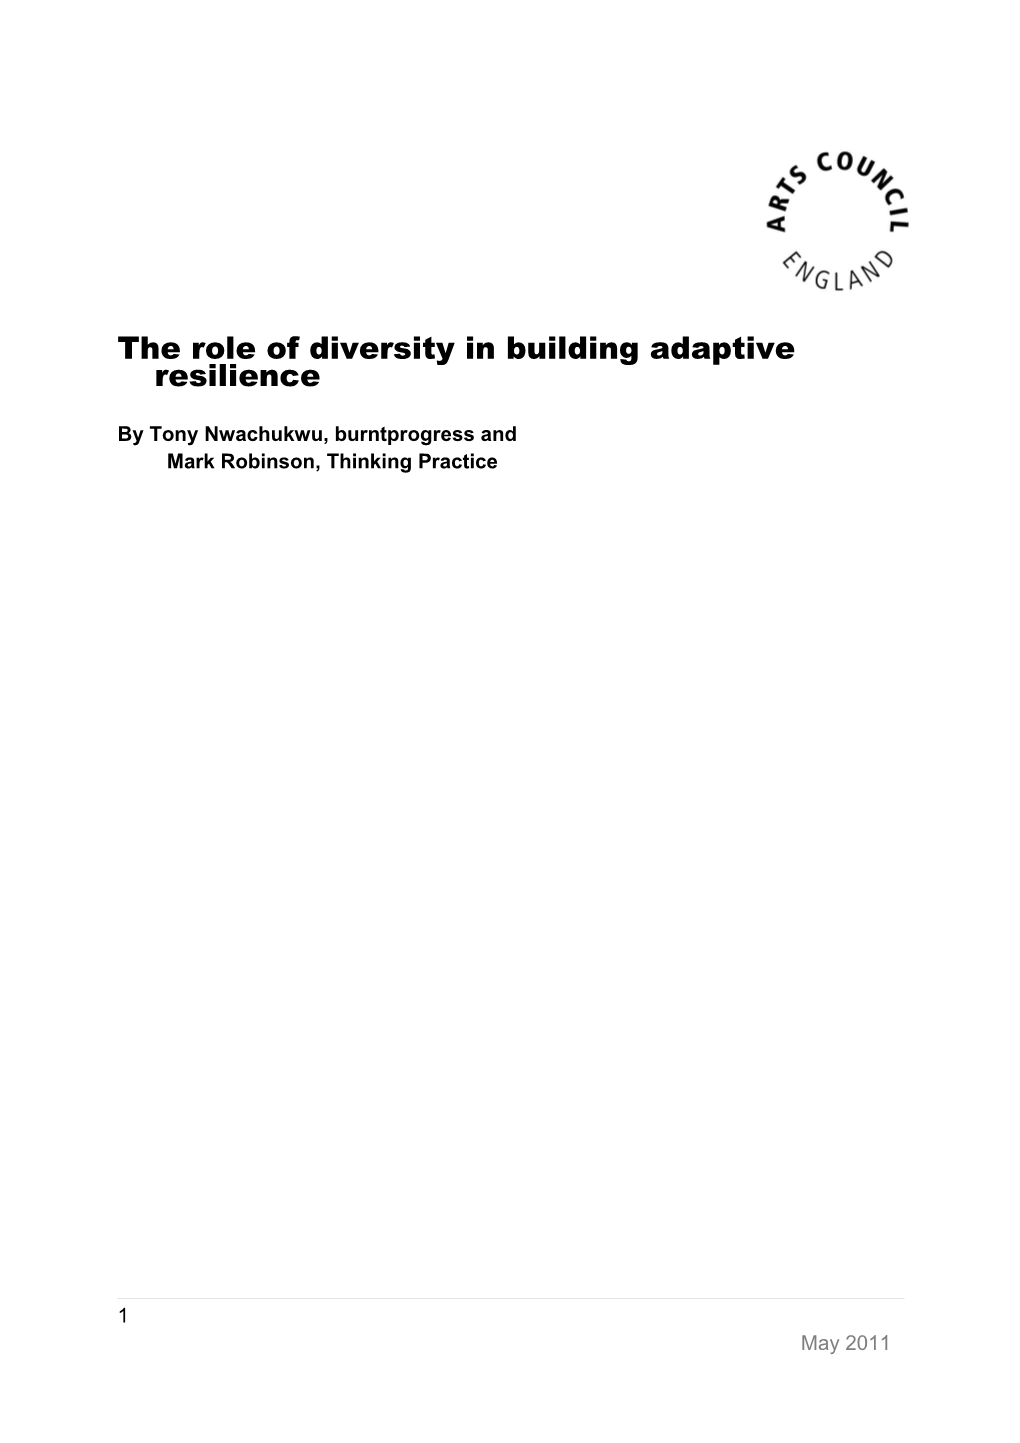 The Role of Diversity in Building Adaptive Resilience